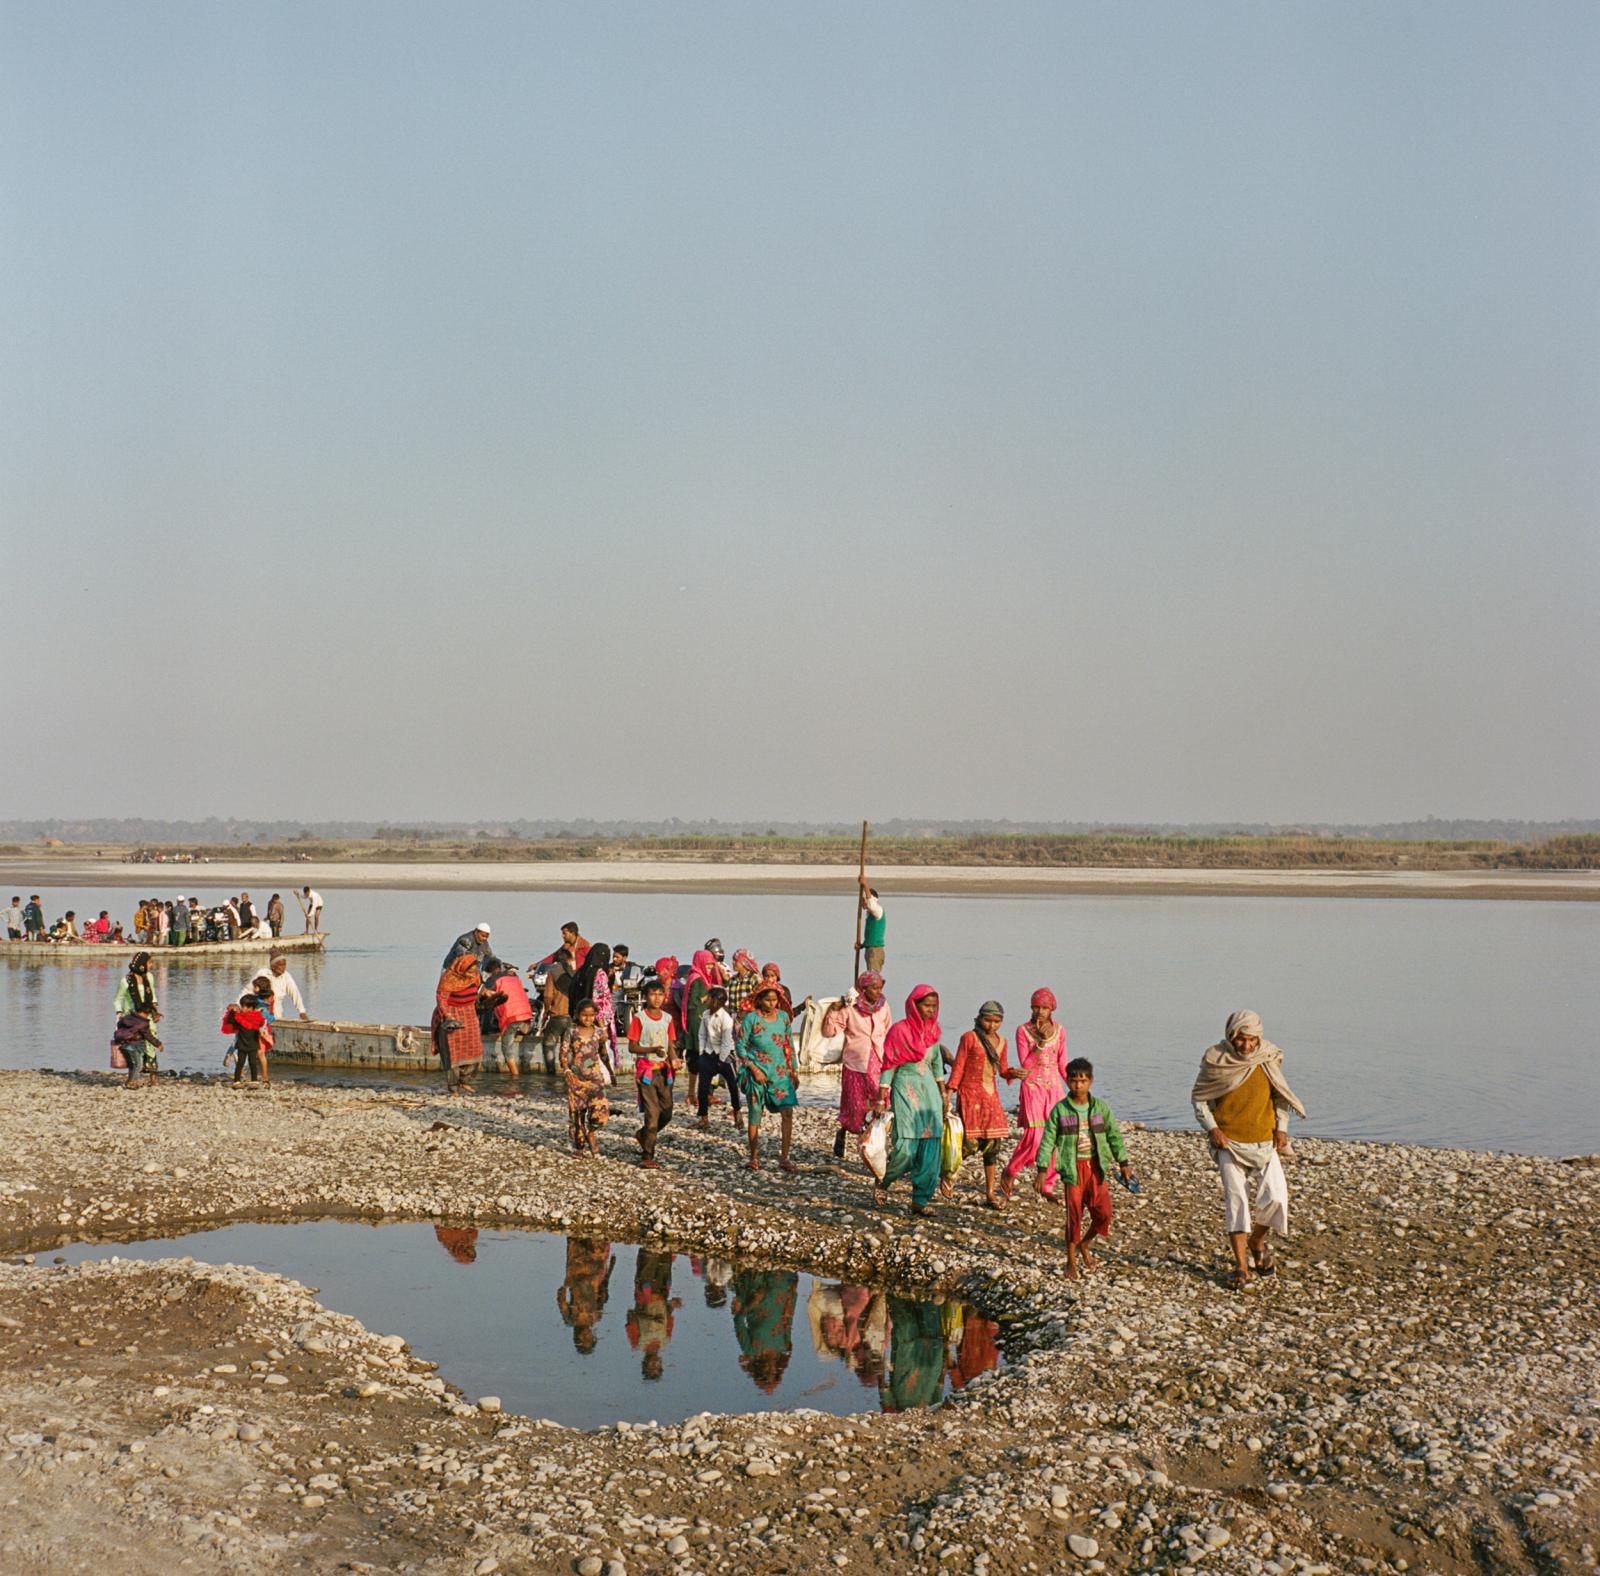 Saving India's Holiest River? - People wait to cross the Ganges river from the state of...